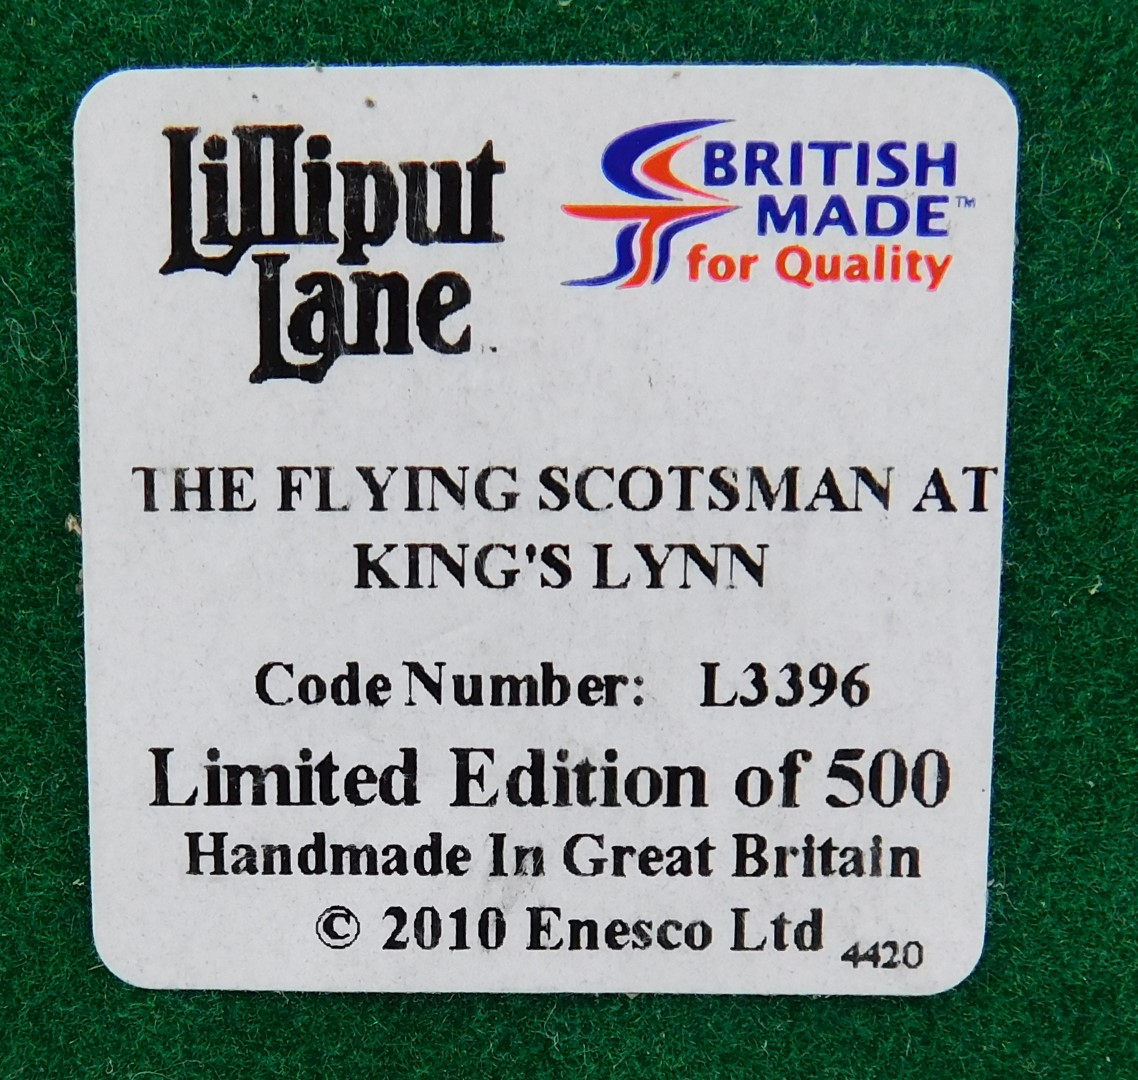 A Lilliput Lane The Flying Scotsman at Kings Lynn group, limited edition of 500, L3396, 21cm wide, - Image 3 of 3